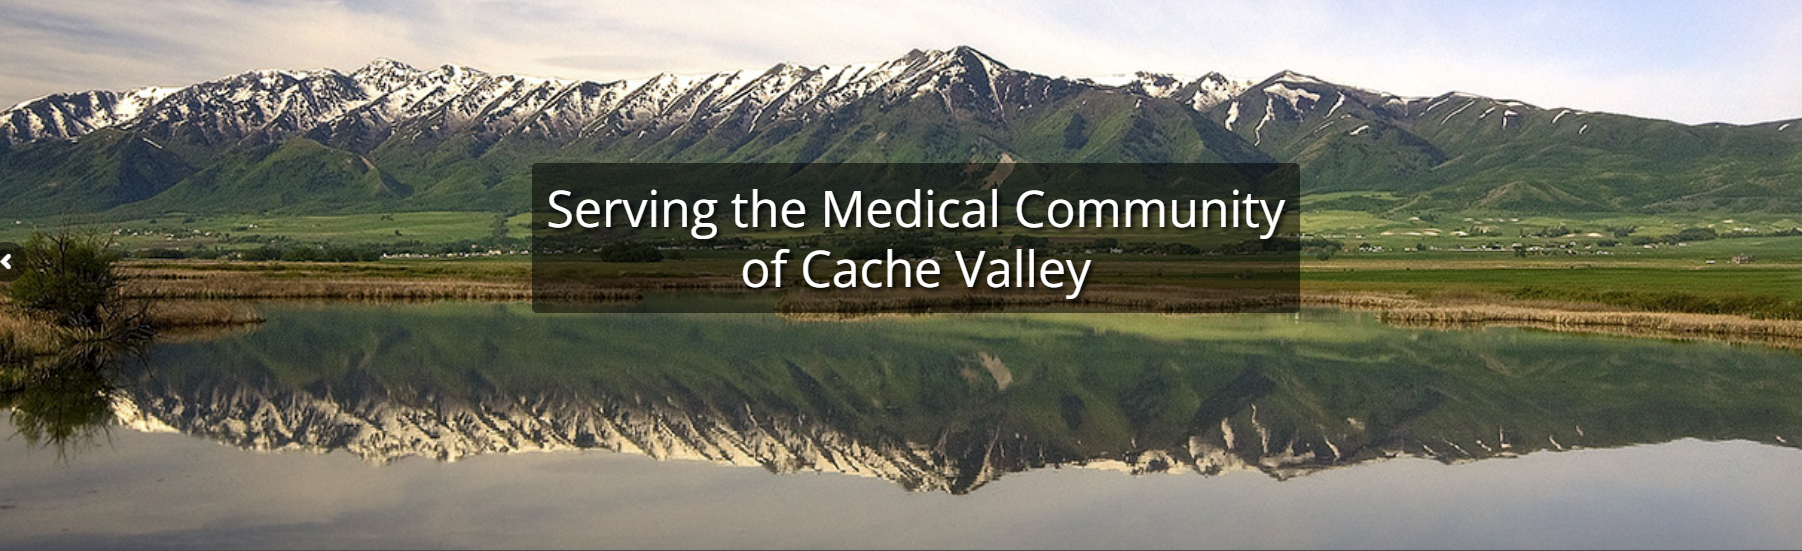 Logan Medical Credit Union: Serving the Medical Community of Cache Valley